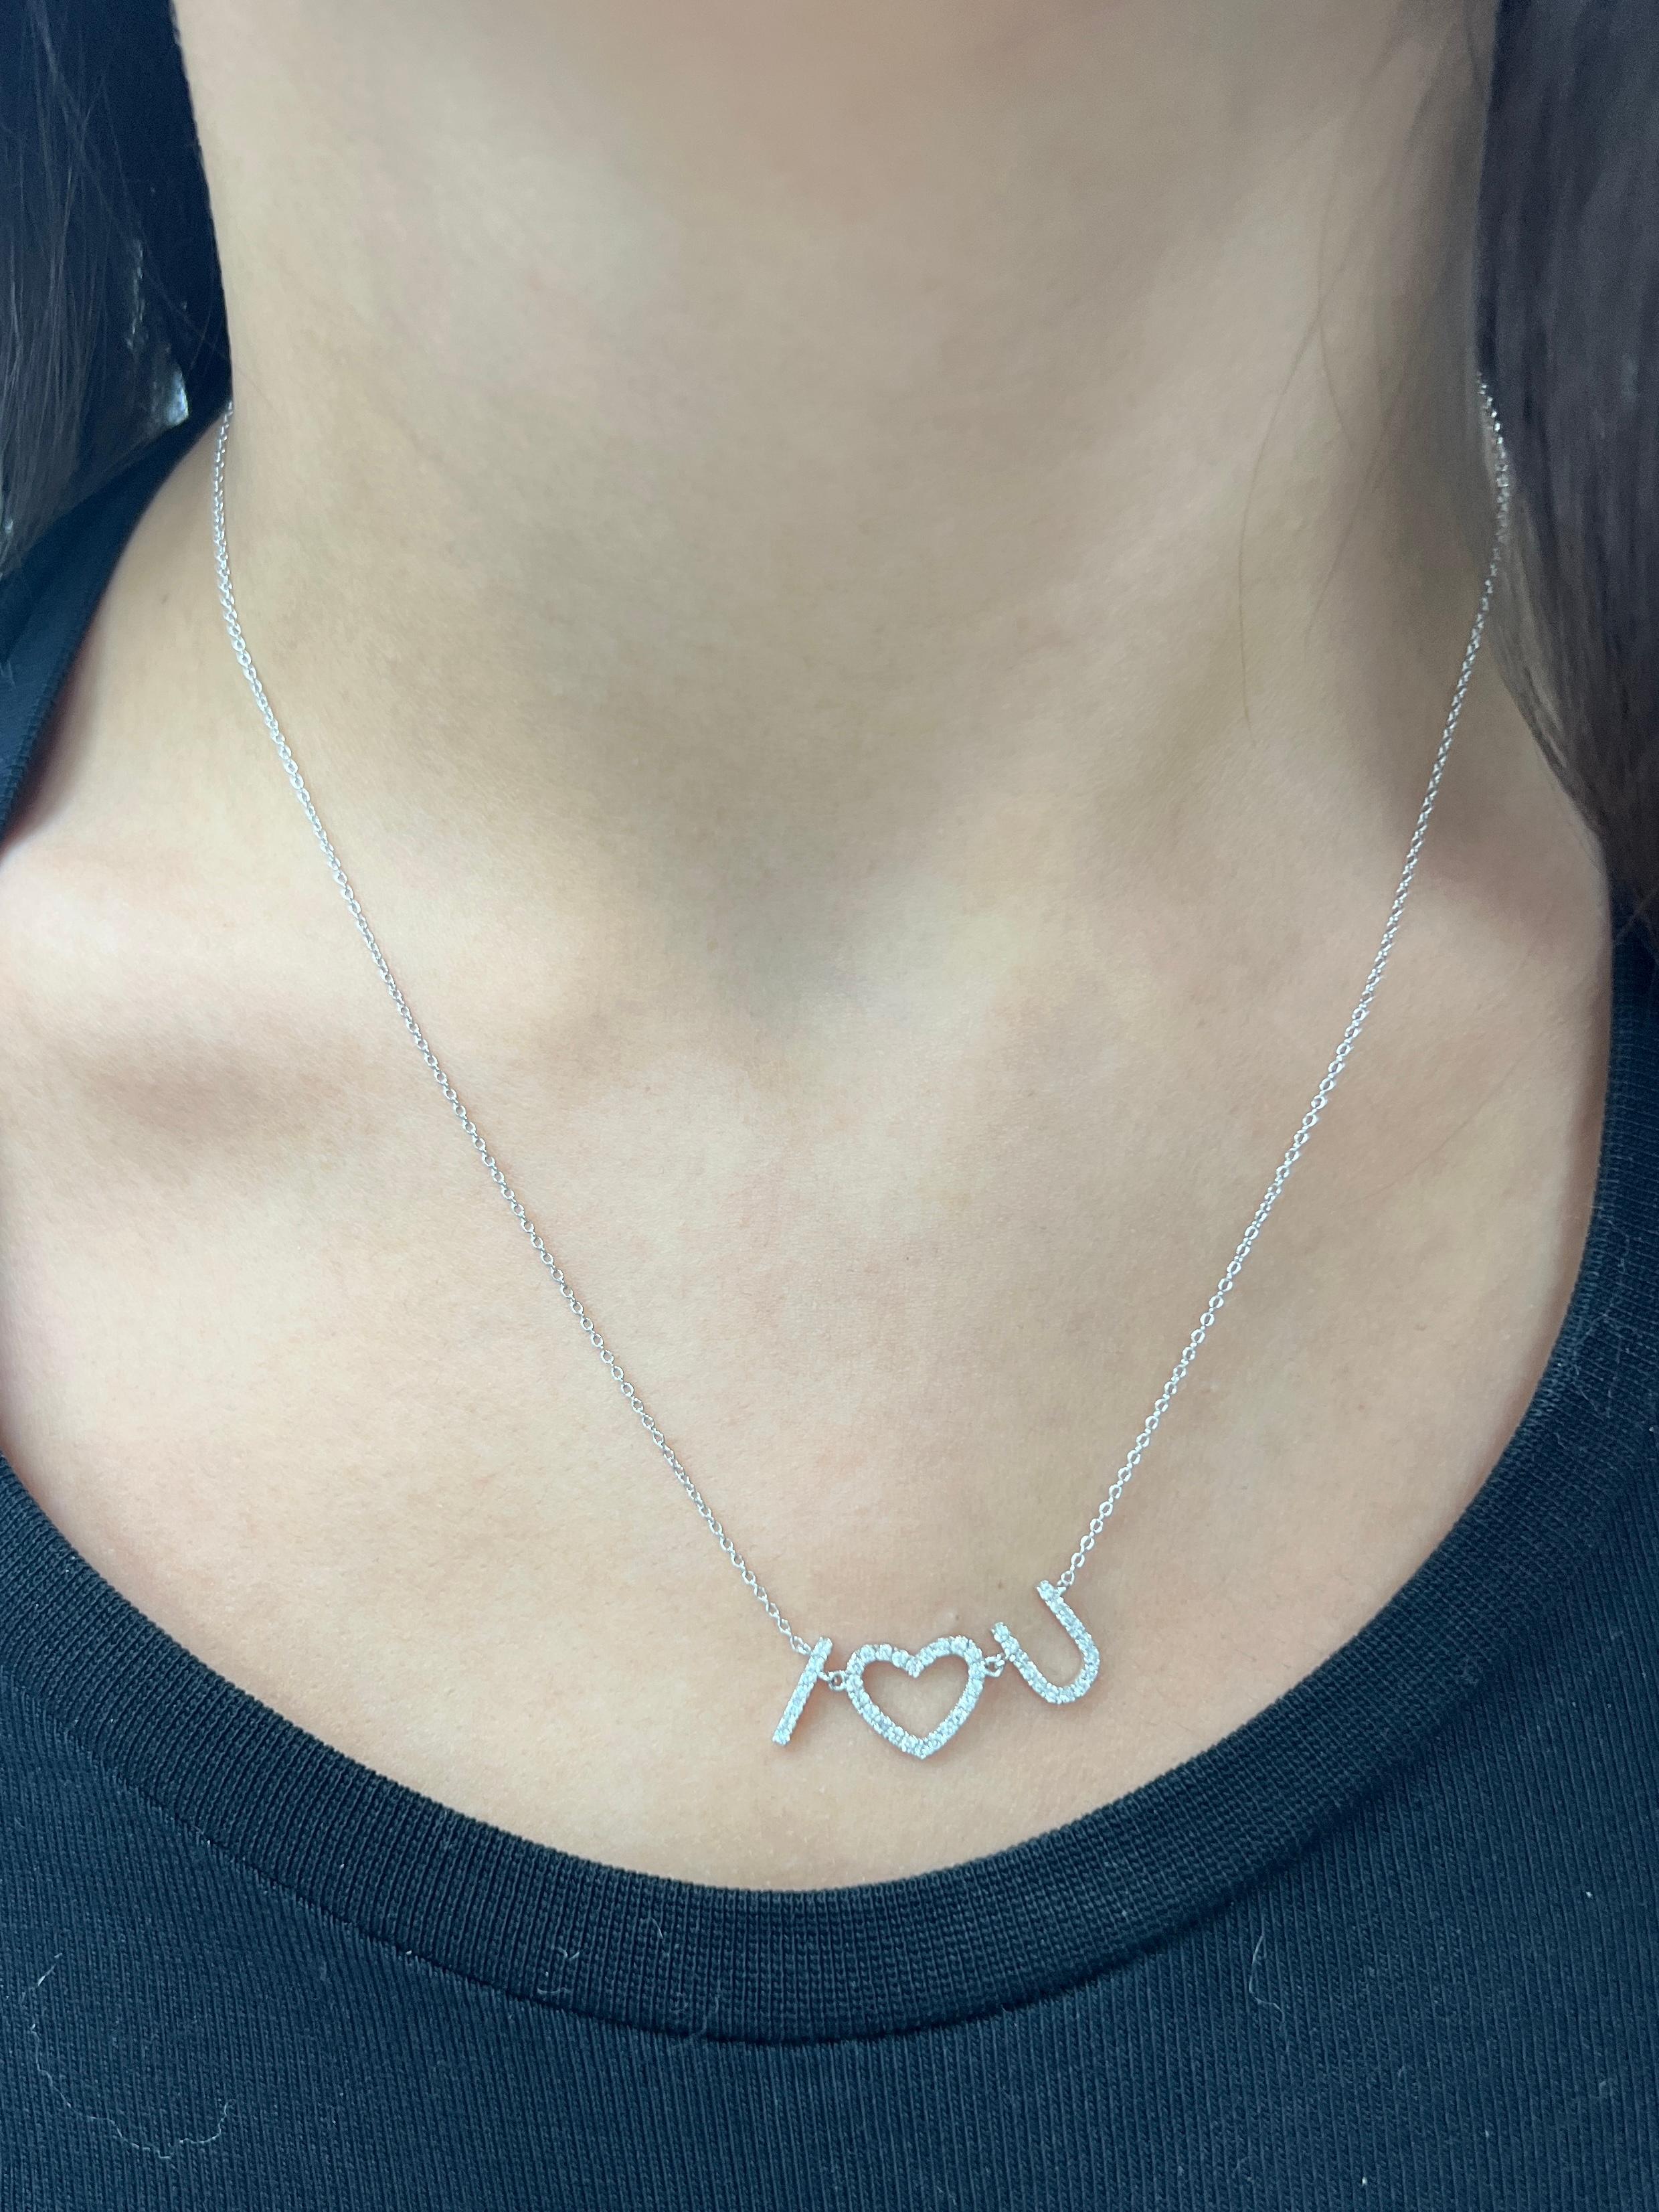 Brilliant Cut White Gold I Love You Necklace For Sale